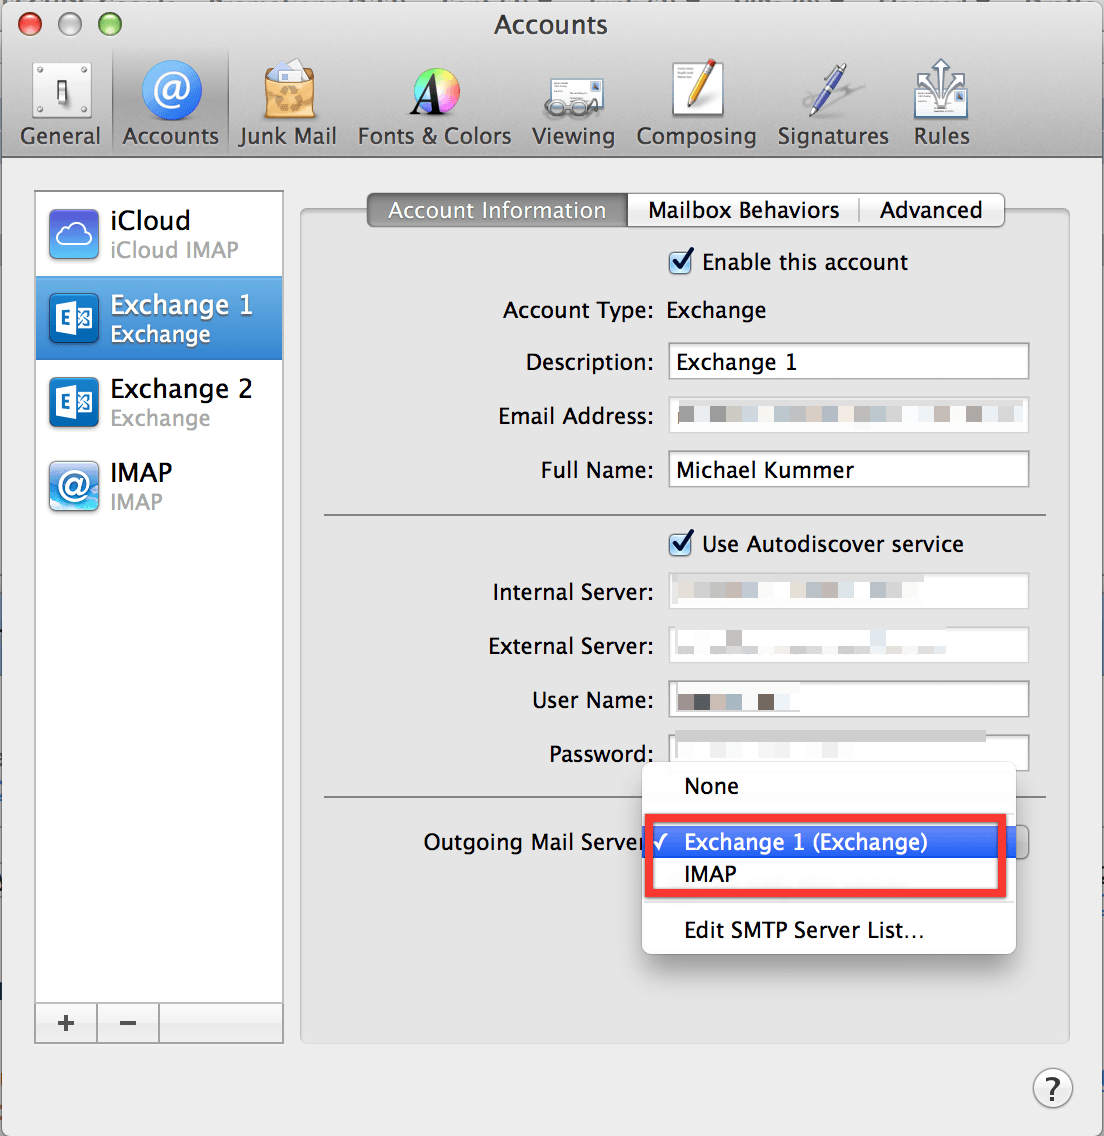 incoming and outgoing settings for outlook on a mac